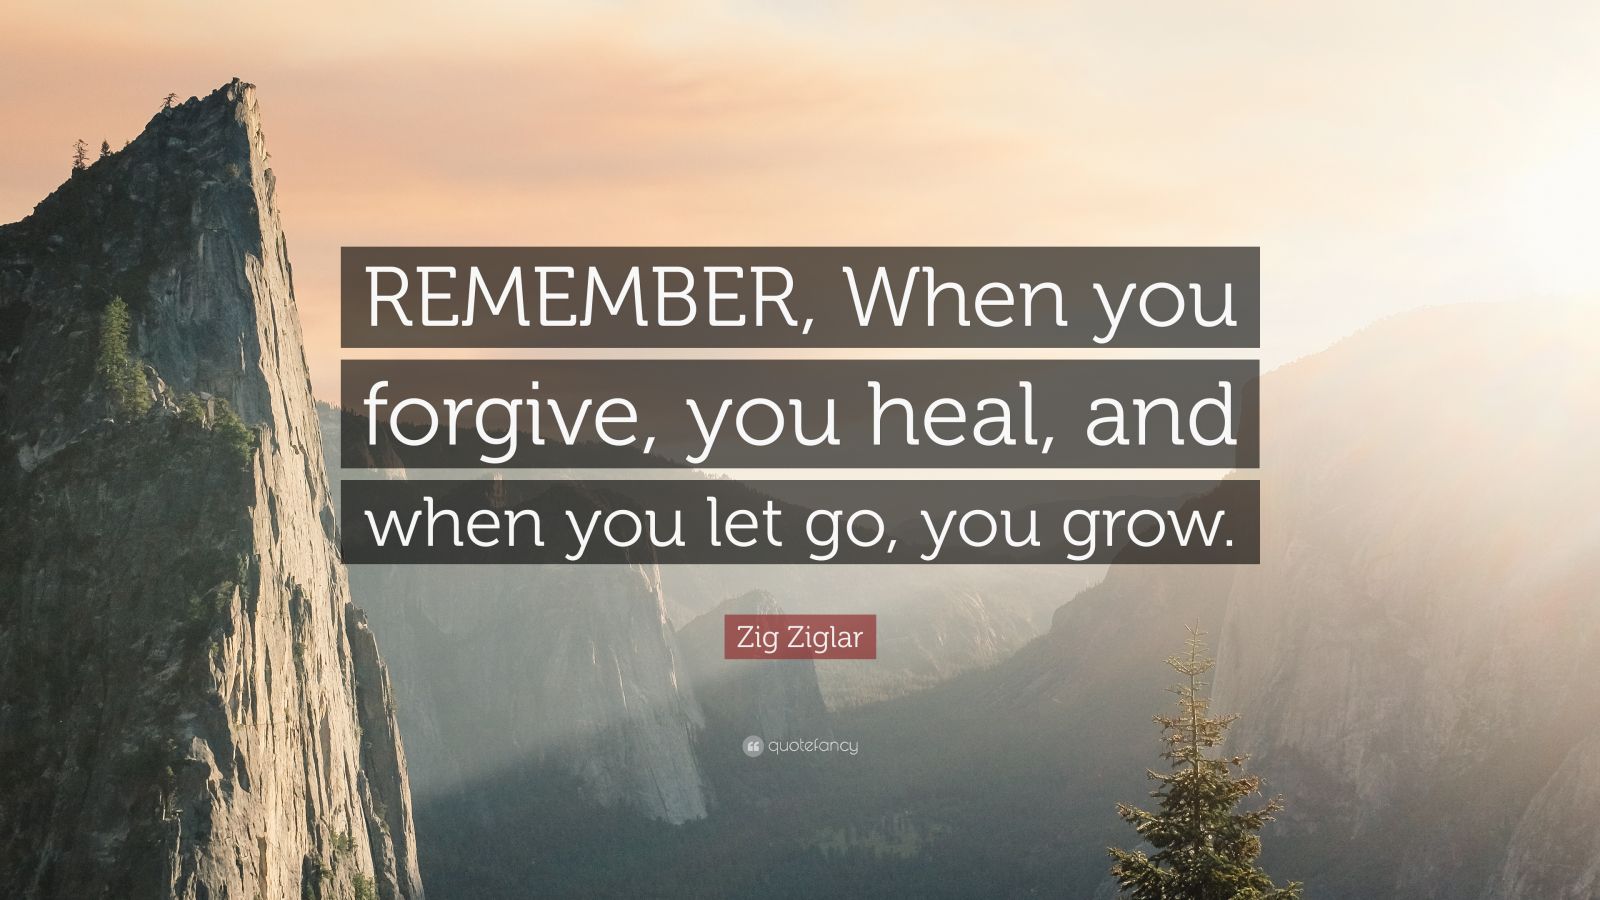 Zig Ziglar Quote: “REMEMBER, When you forgive, you heal, and when you ...